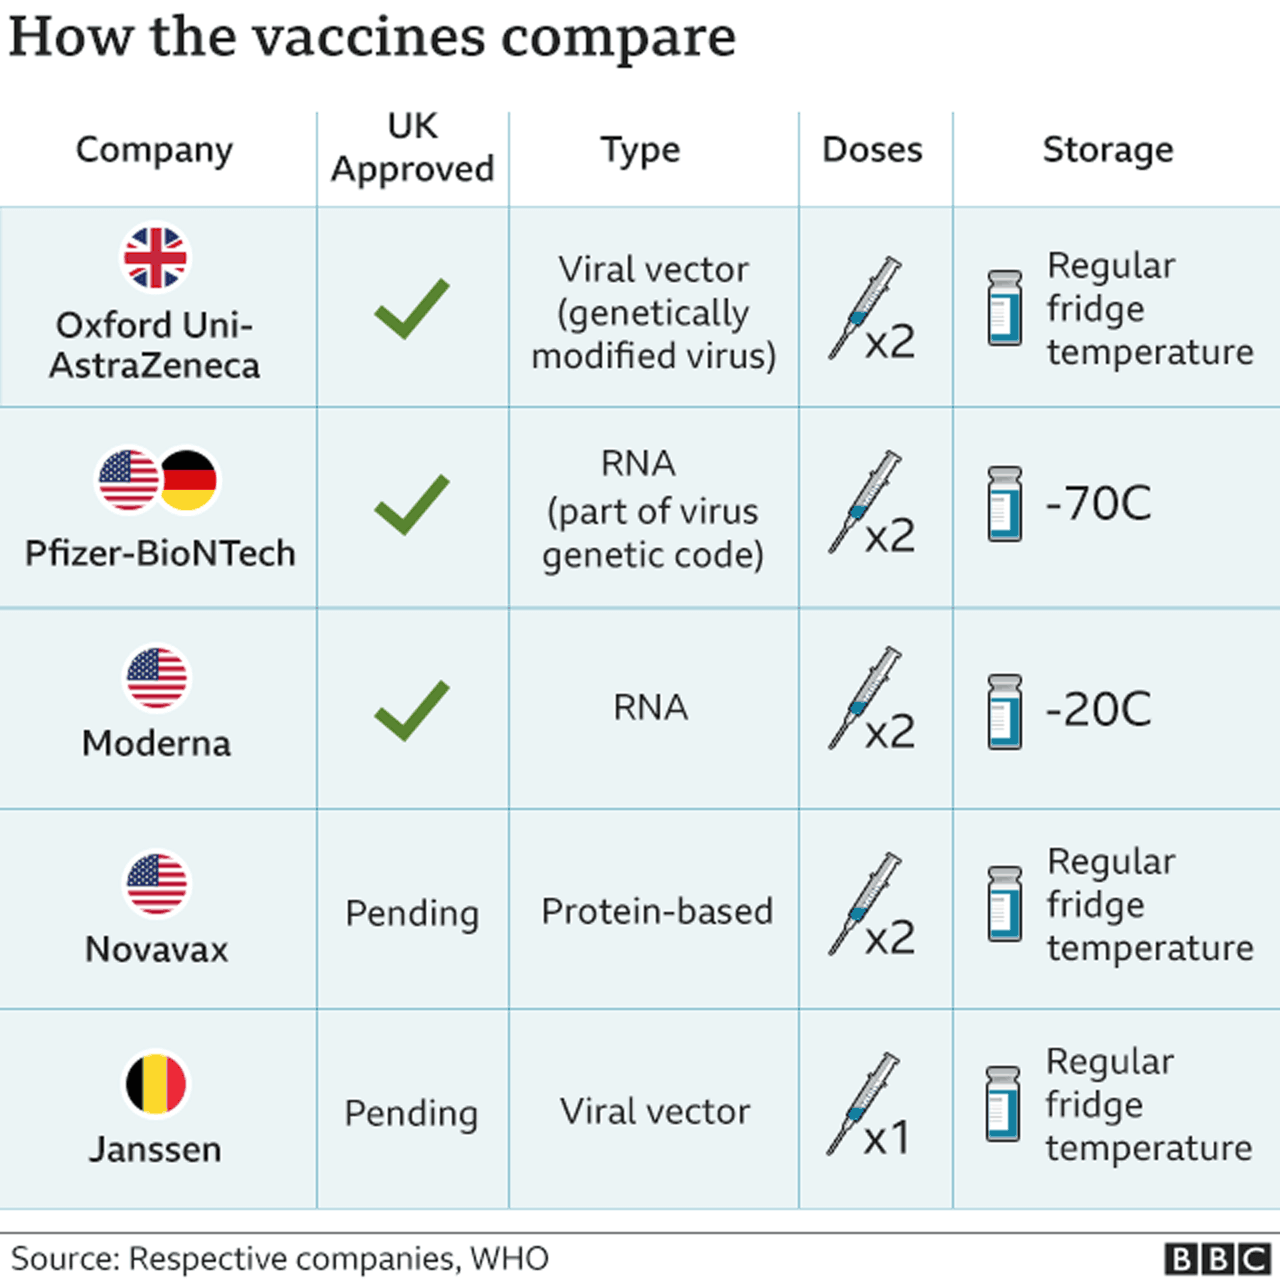 How the vaccines compare?